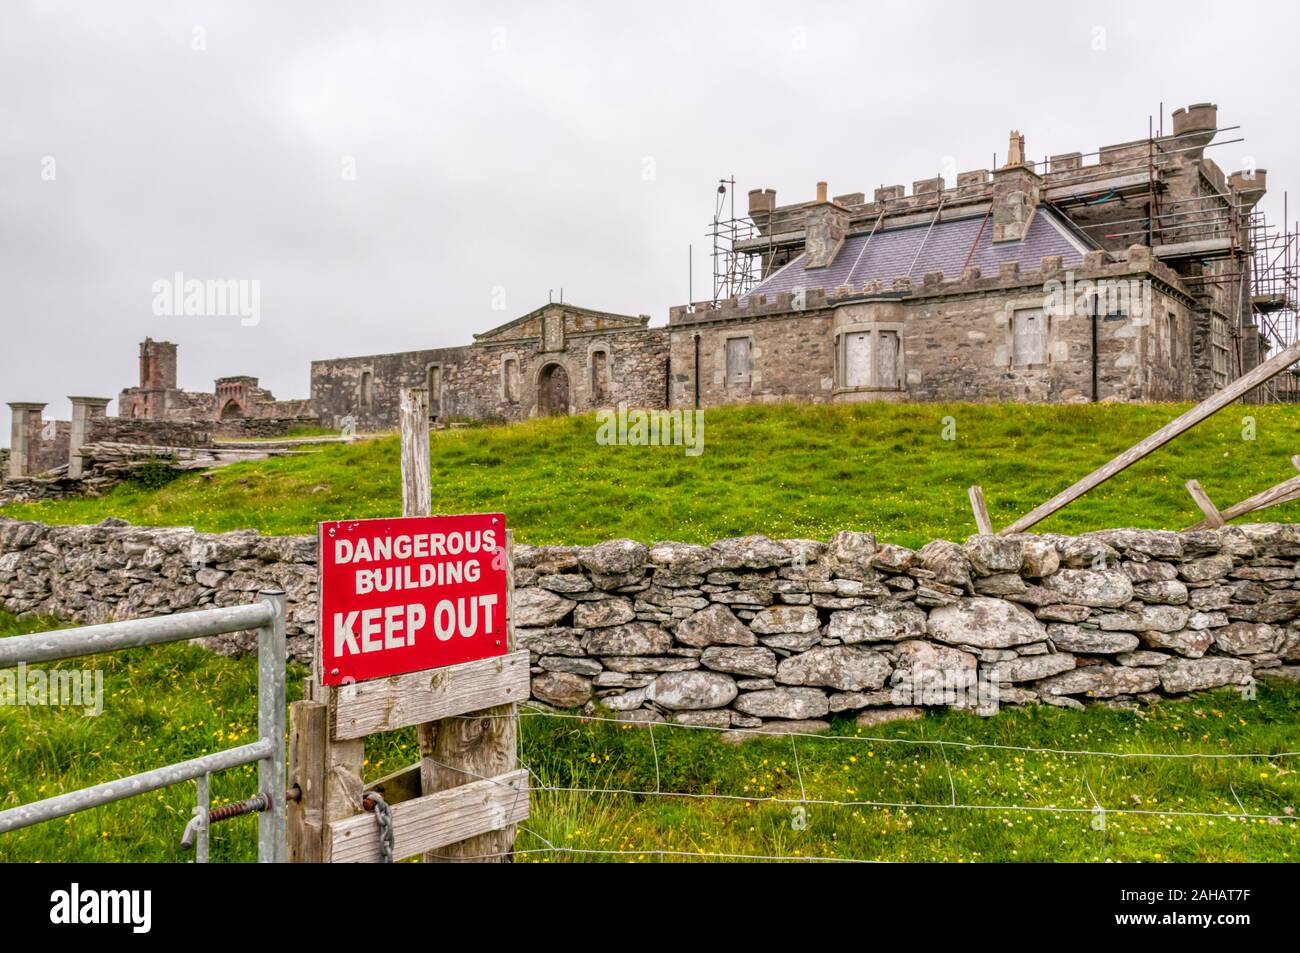 The semi-derelict Brough Lodge on the island of Fetlar, Shetland. Built in 1820 it is now being restored by the Brough Lodge Trust. Stock Photo